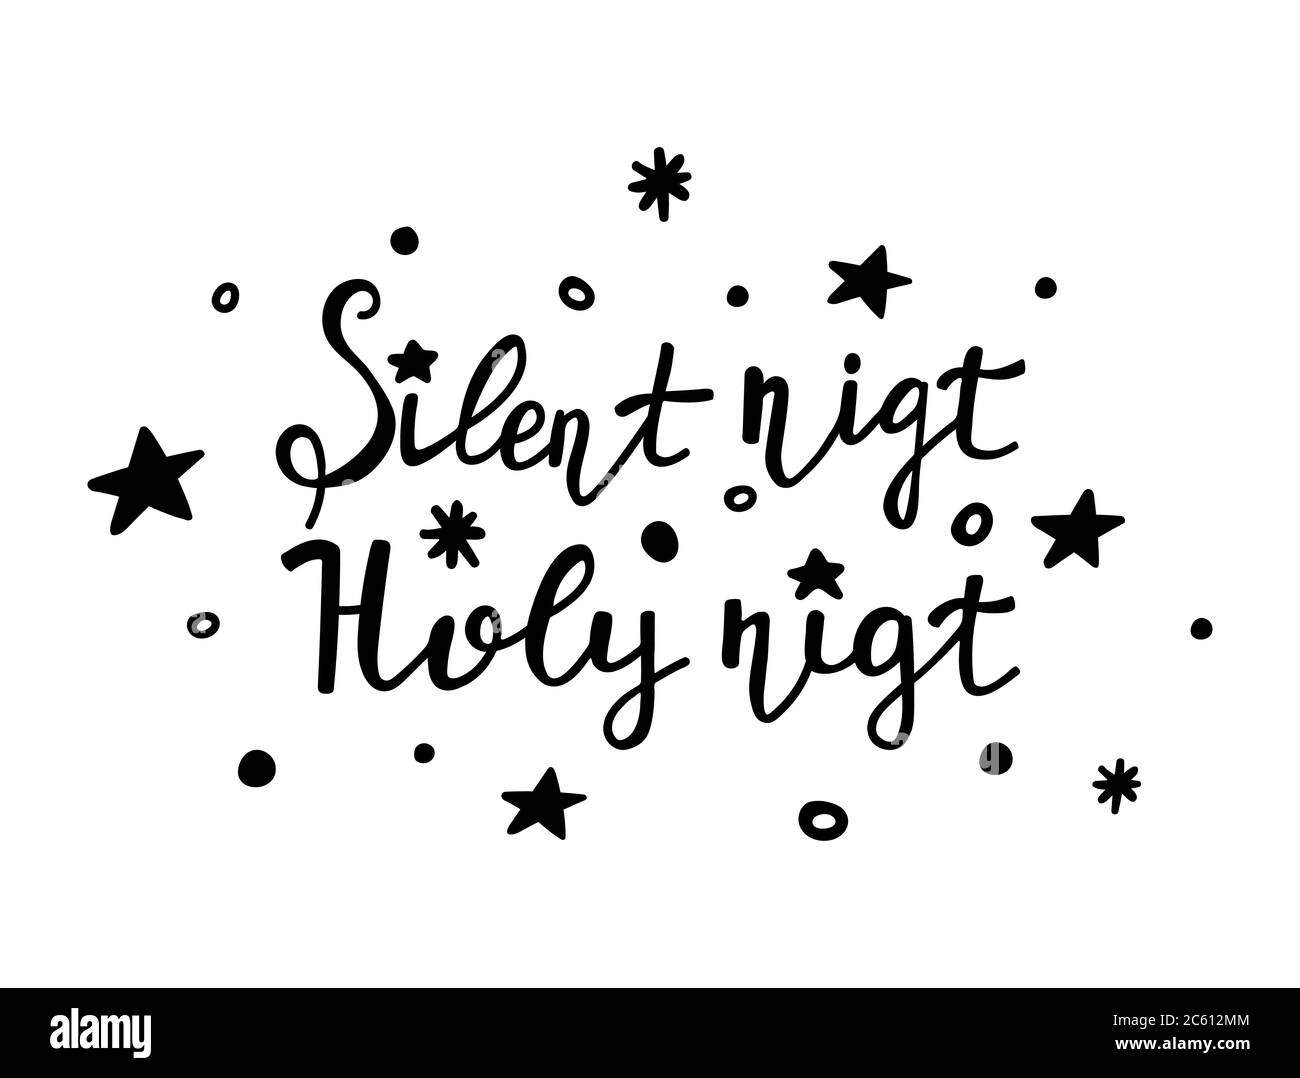 Hand lettering Silent night, Holy night isolated on white background. Hand drawn winter design elements for web banner, poster, card, print. Vector il Stock Vector